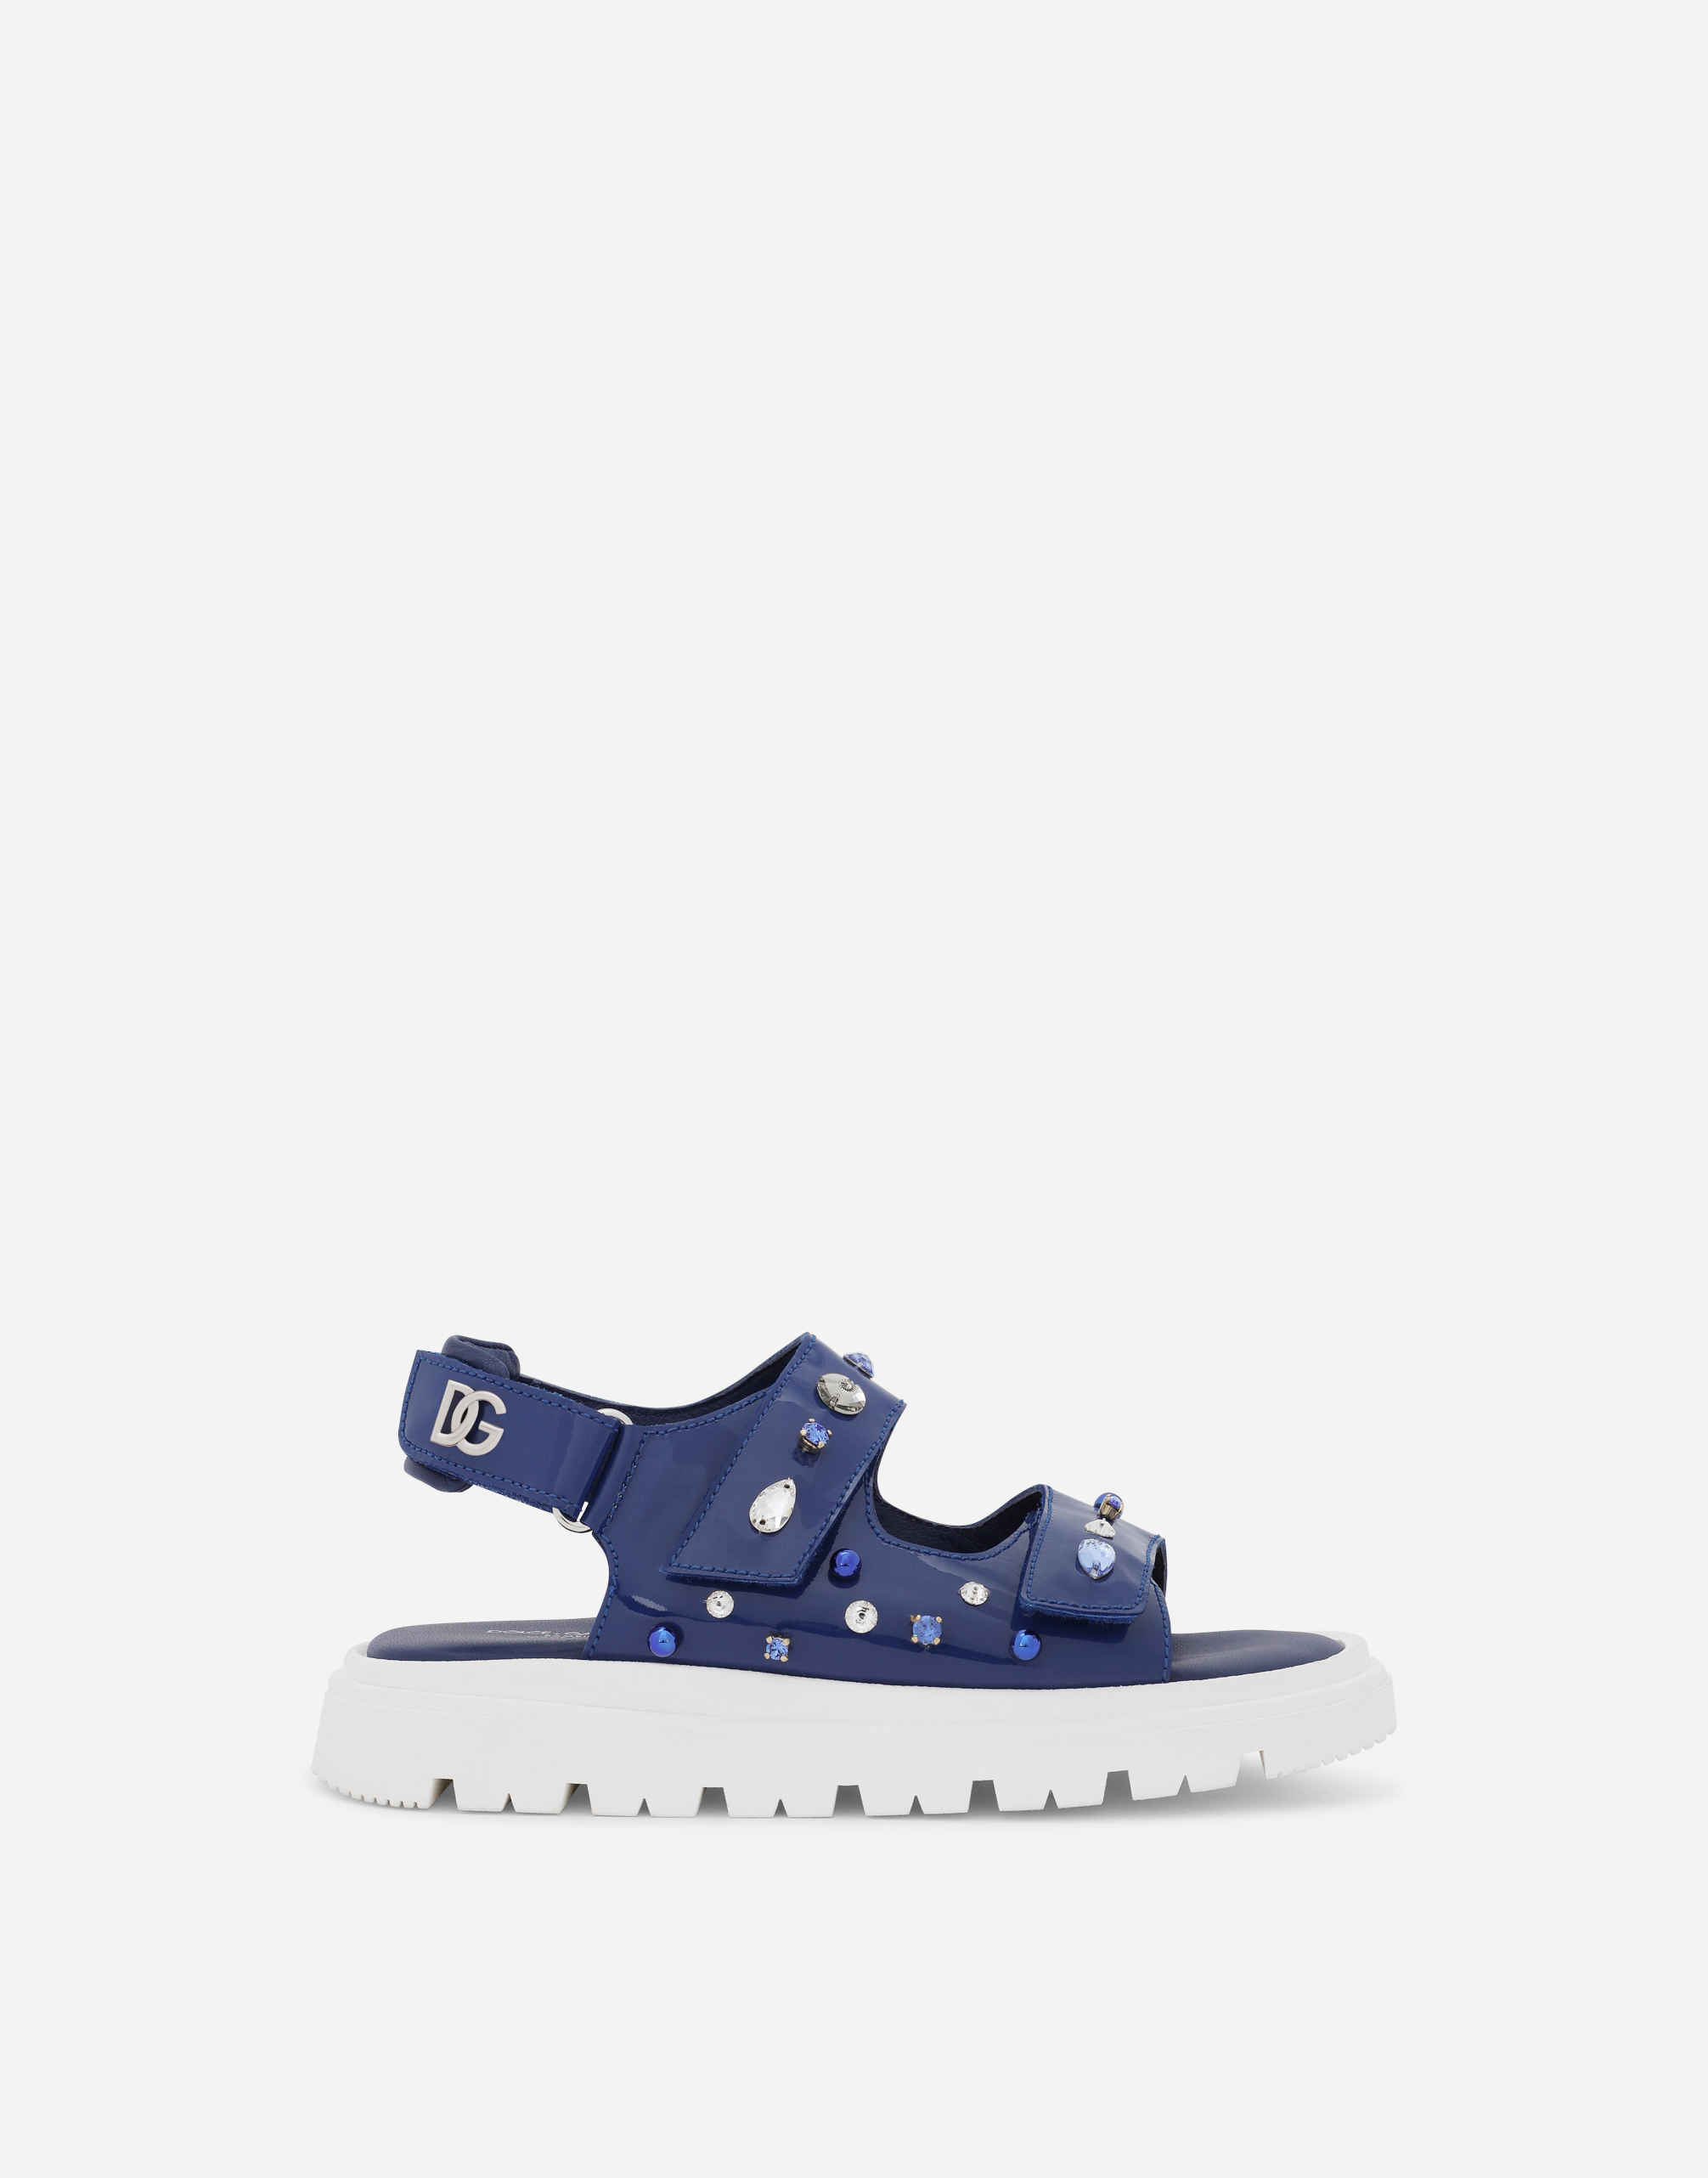 Patent leather sandals with rhinestone embellishment in Blue